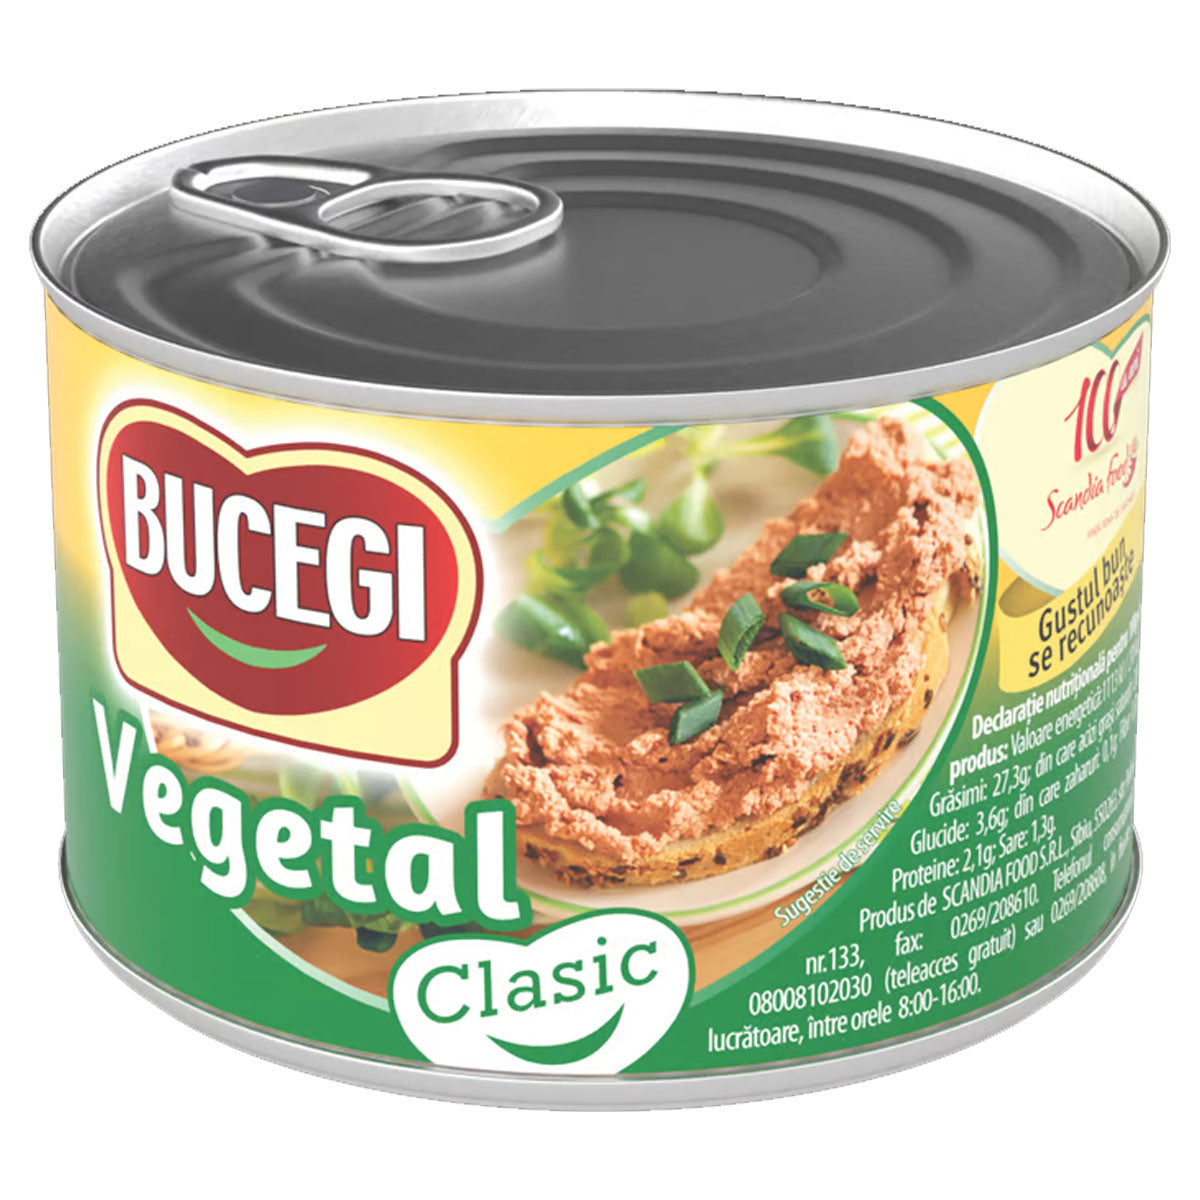 A can of Bucegi - Vegetable Pate (Vegetal Clasic) - 200g on a white background.